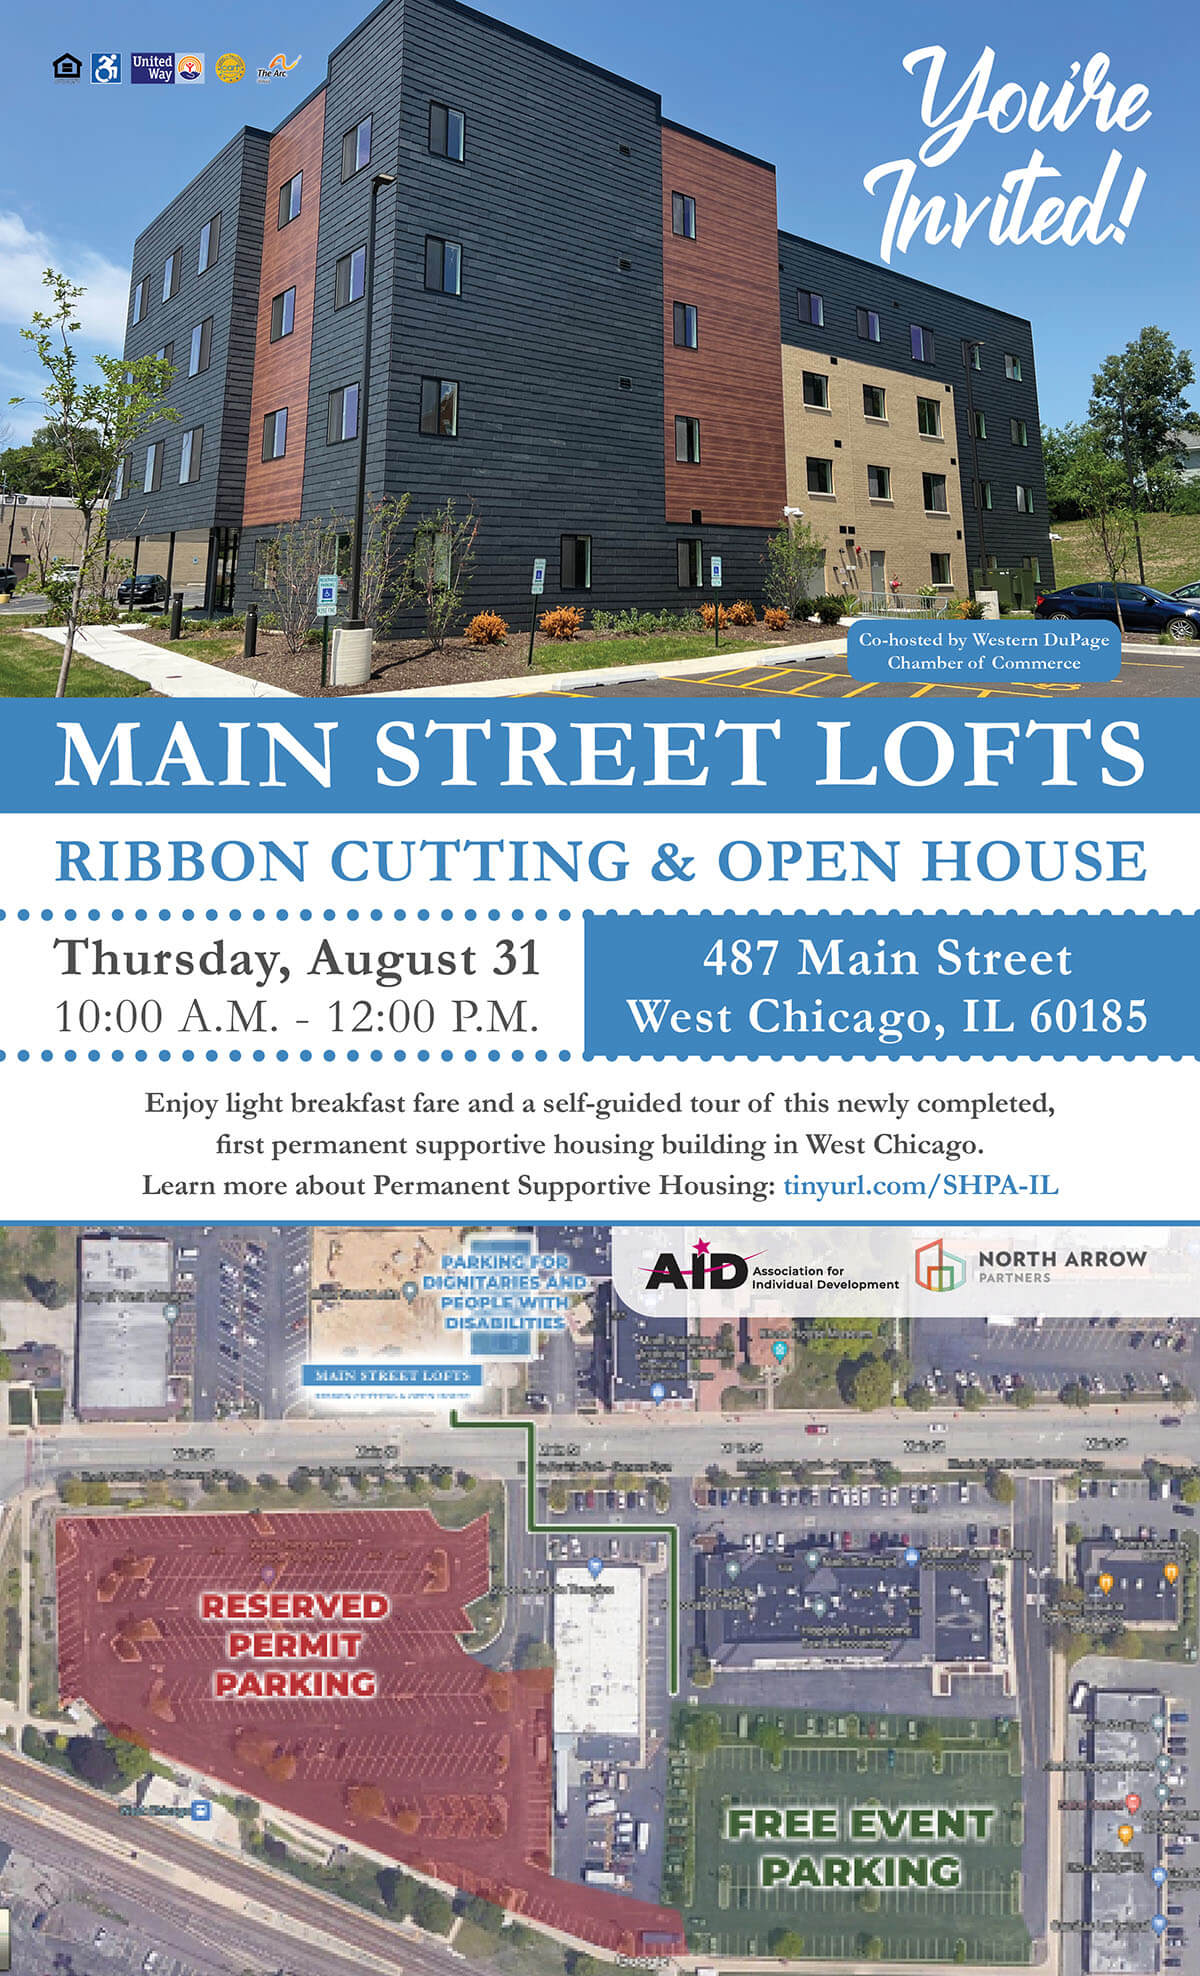 Main Street Lofts RIBBON CUTTING & OPEN HOUSE Thursday, August 31 10:00 A.M. - 12:00 P.M. 487 Main Street West Chicago, IL 60185 Enjoy light breakfast fare and a self-guided tour of this newly completed, first permanent supportive housing building in West Chicago. Learn more about Permanent Supportive Housing: tinyurl.com/SHPA-IL